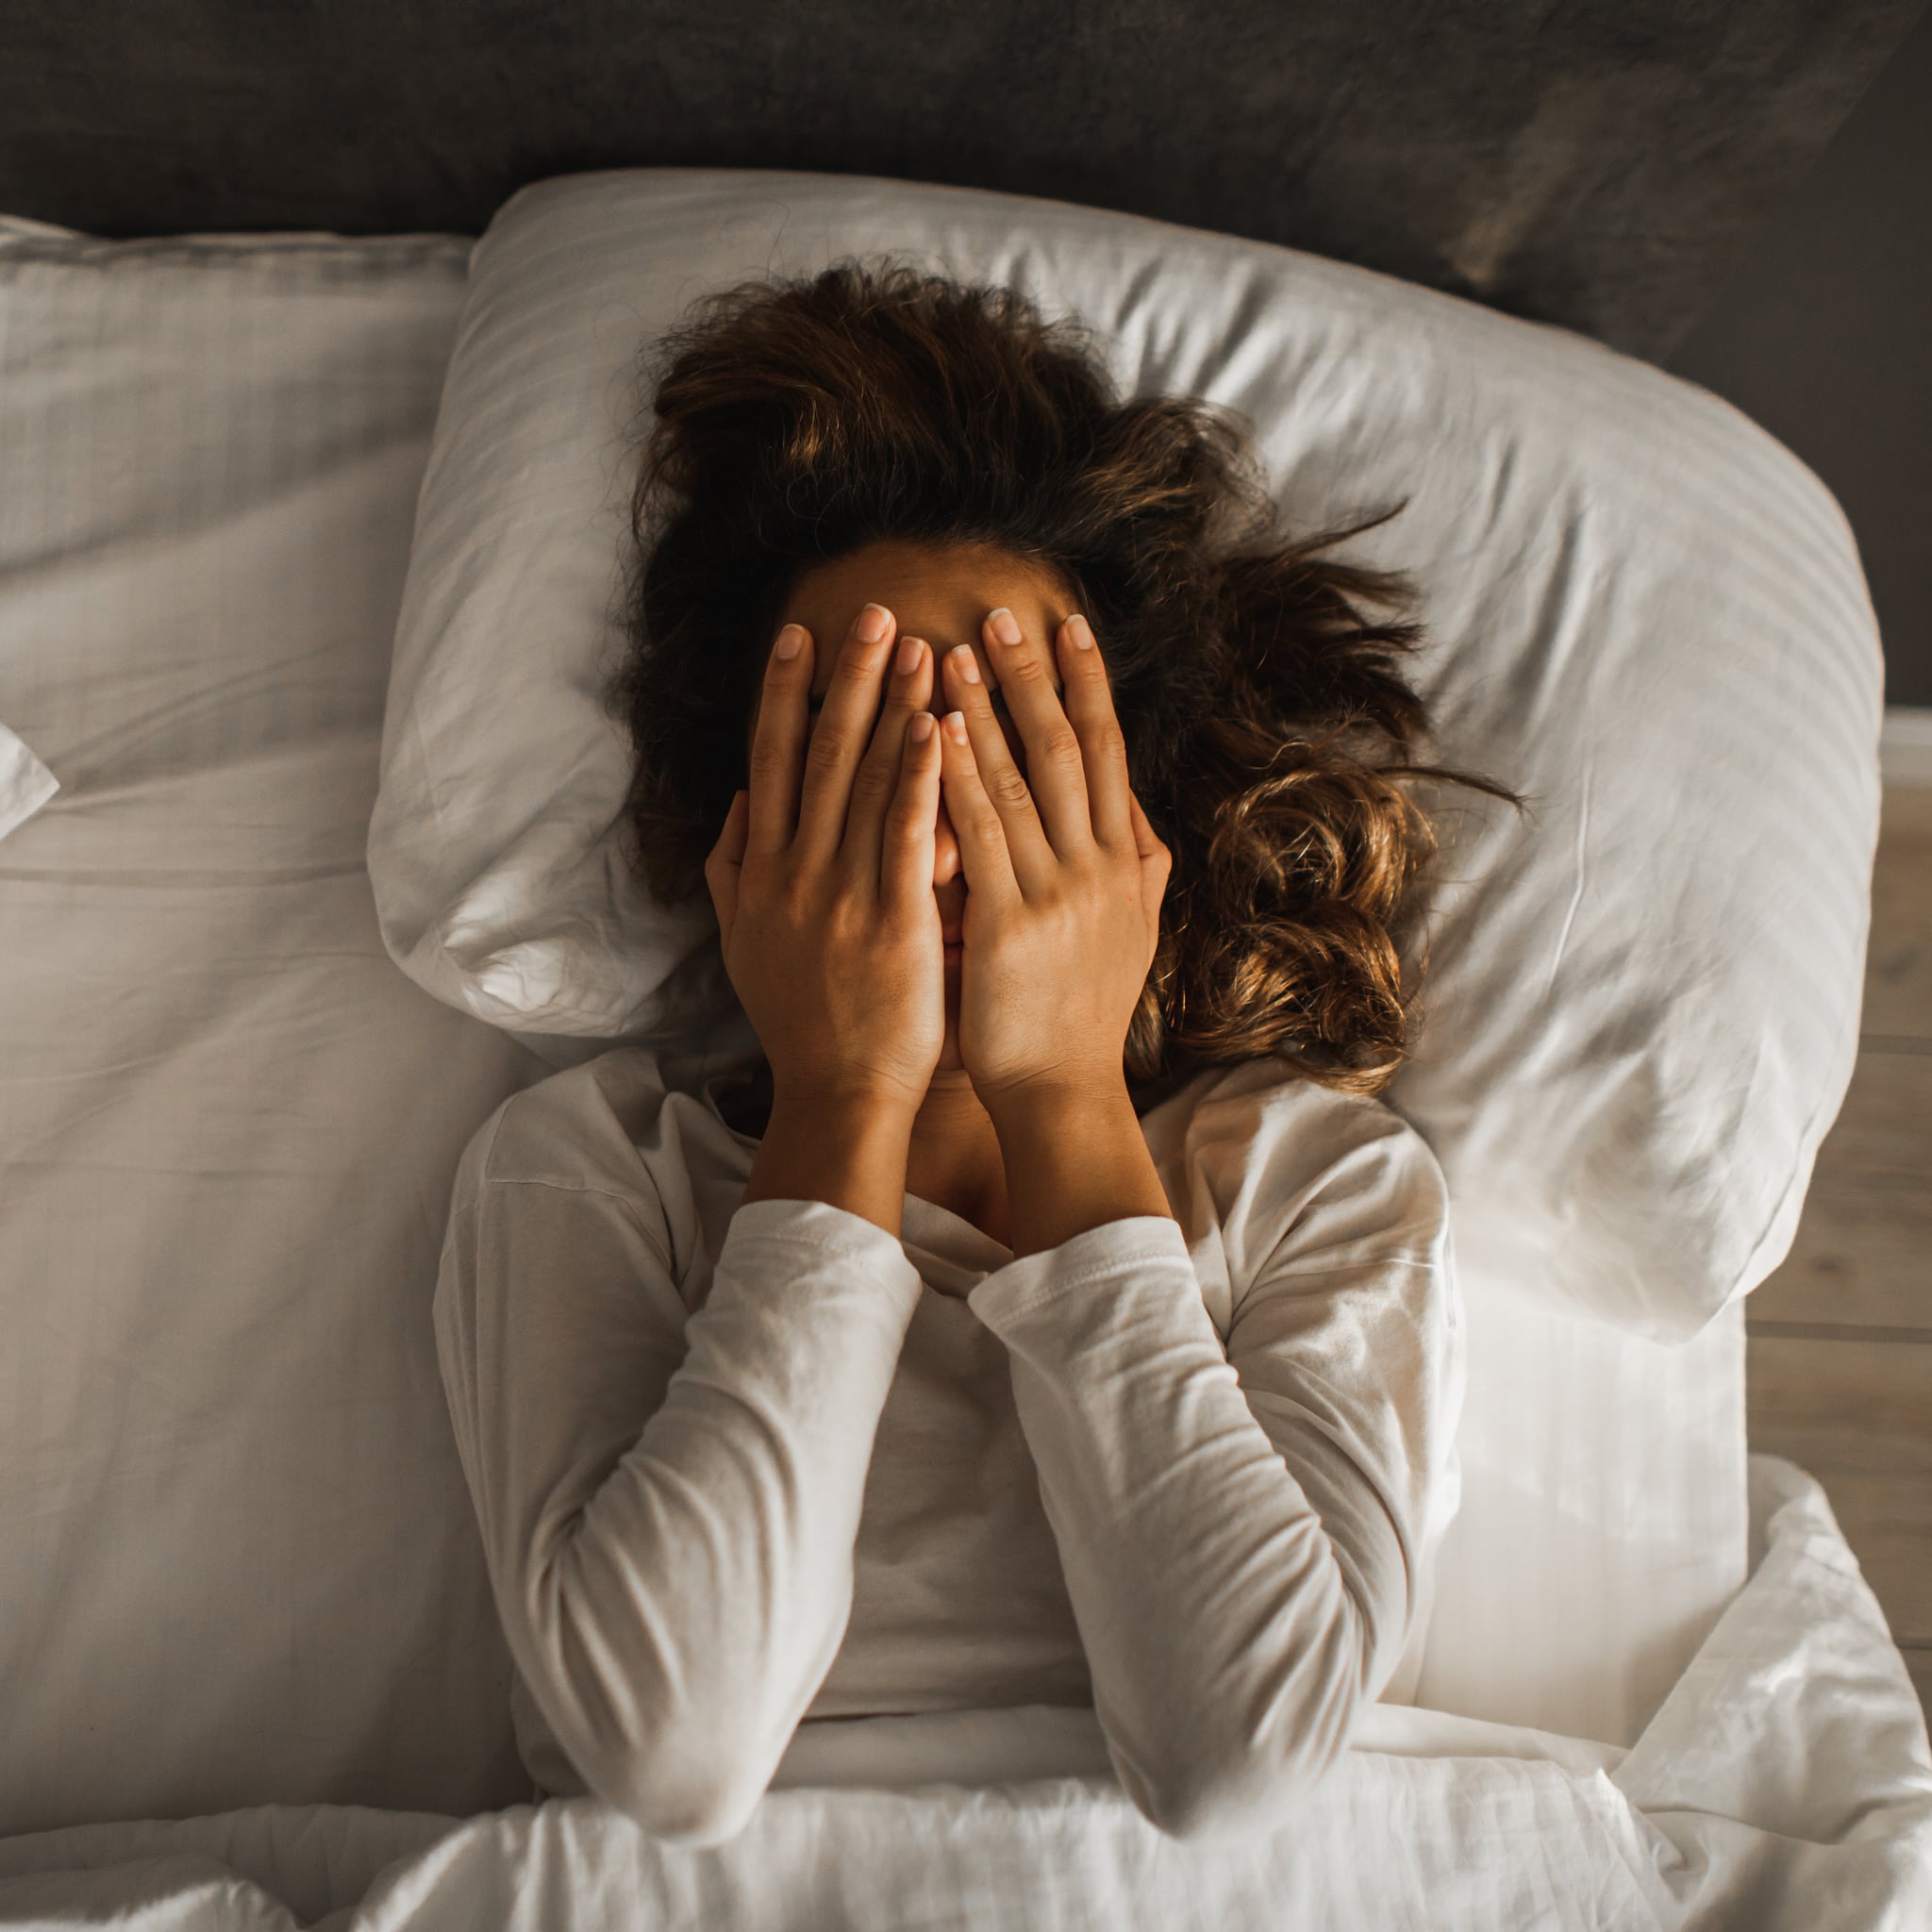 Can Anxiety Cause Bad Dreams?